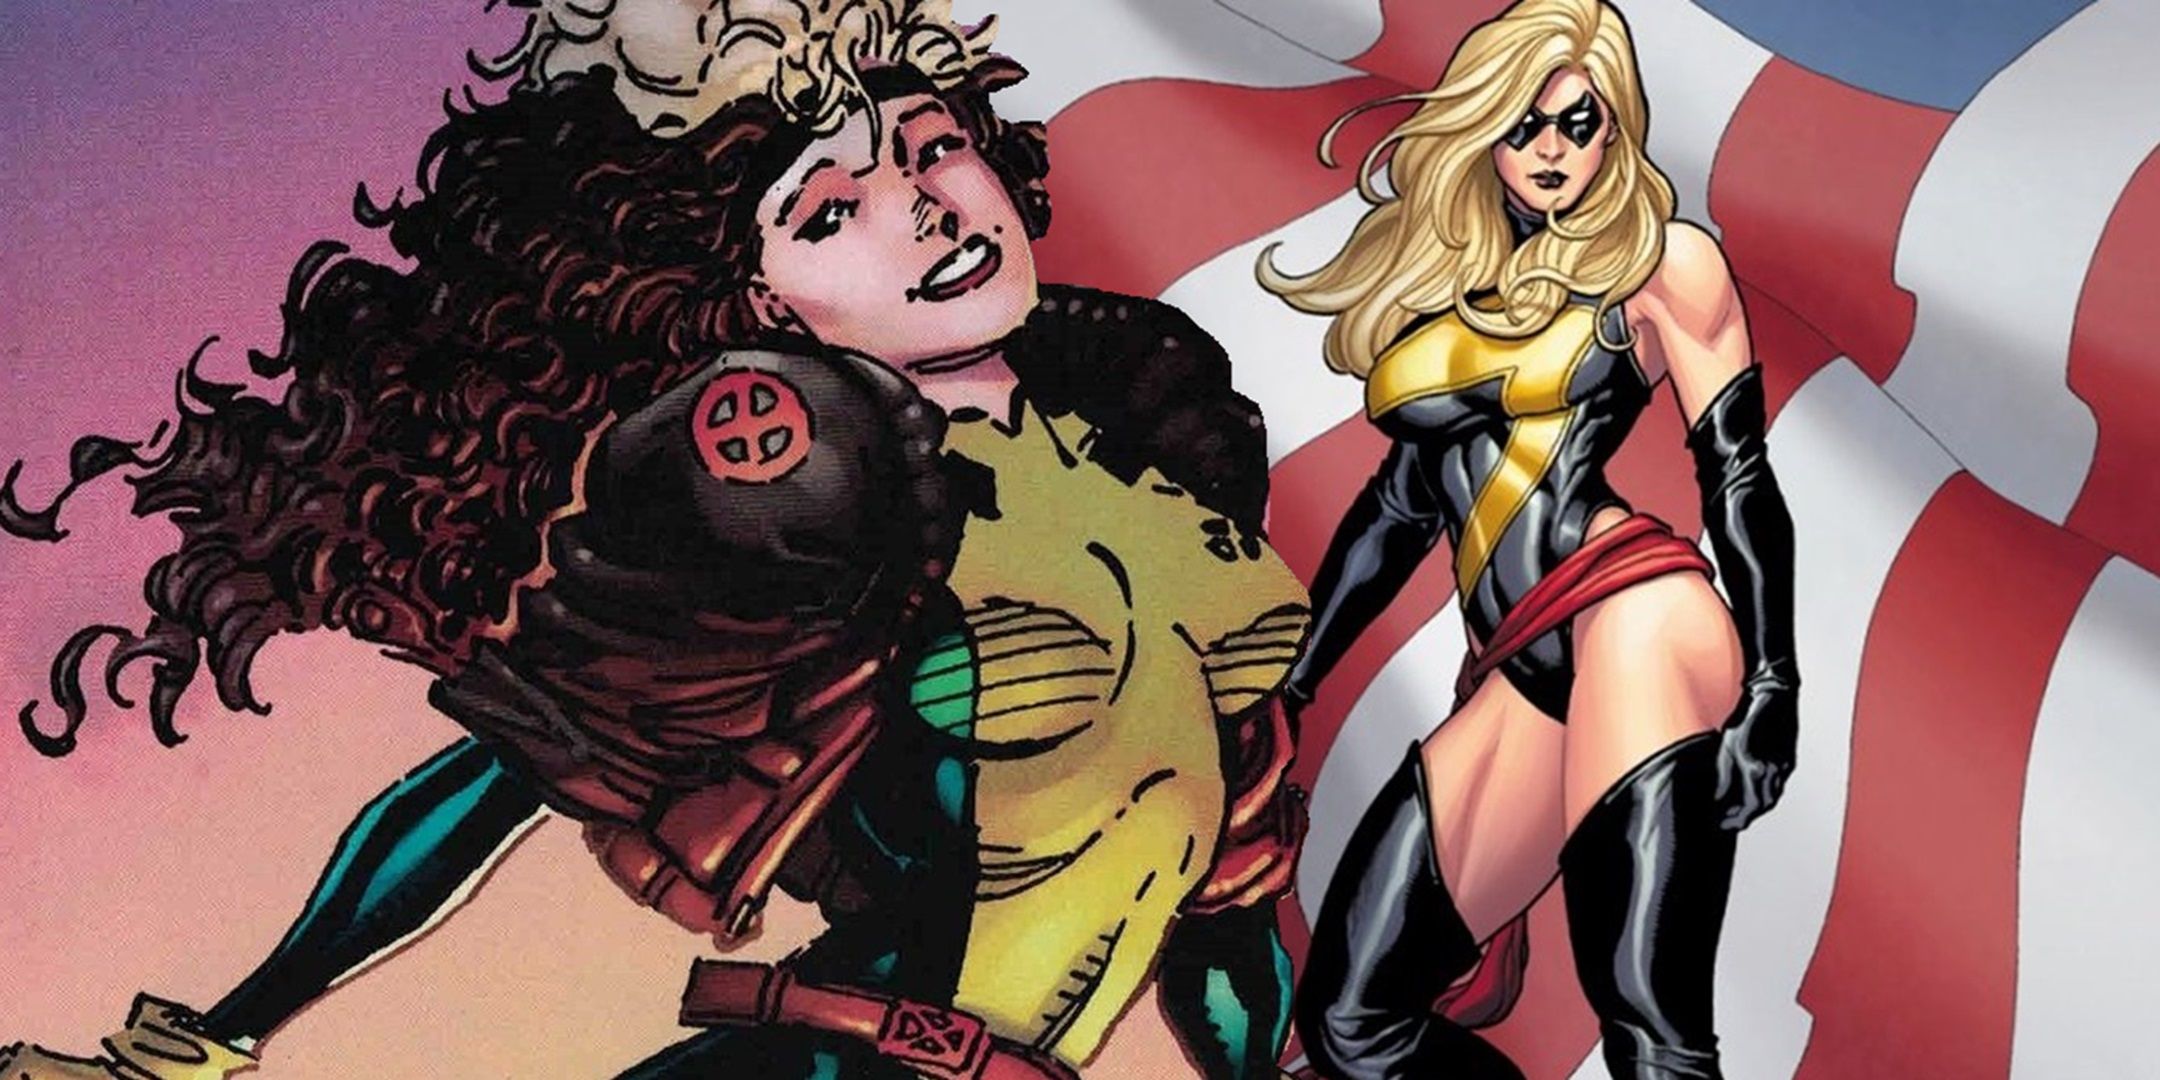 Rogue side-by-side with Ms. Marvel